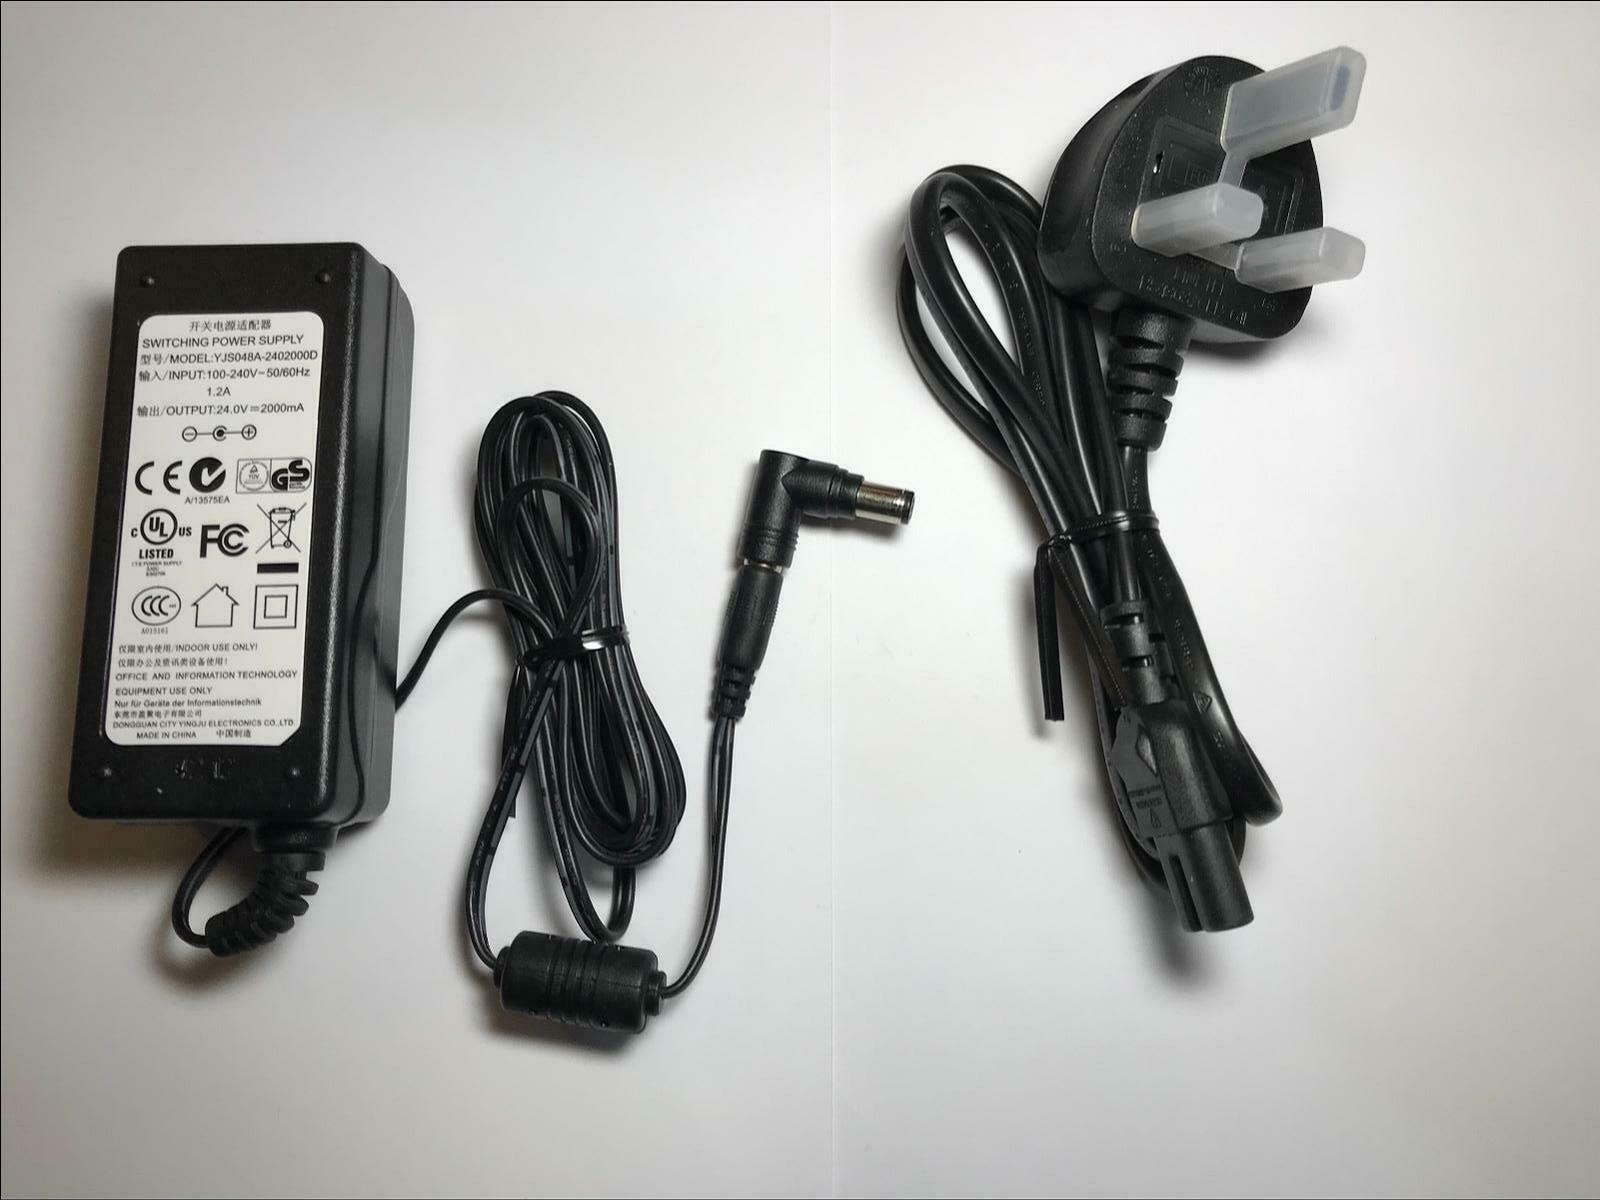 Replacement for 25V 1.52A DA-38A25 AC Adaptor Power Supply for LG LH7 Sound Bar This Item is exactly as you see in the